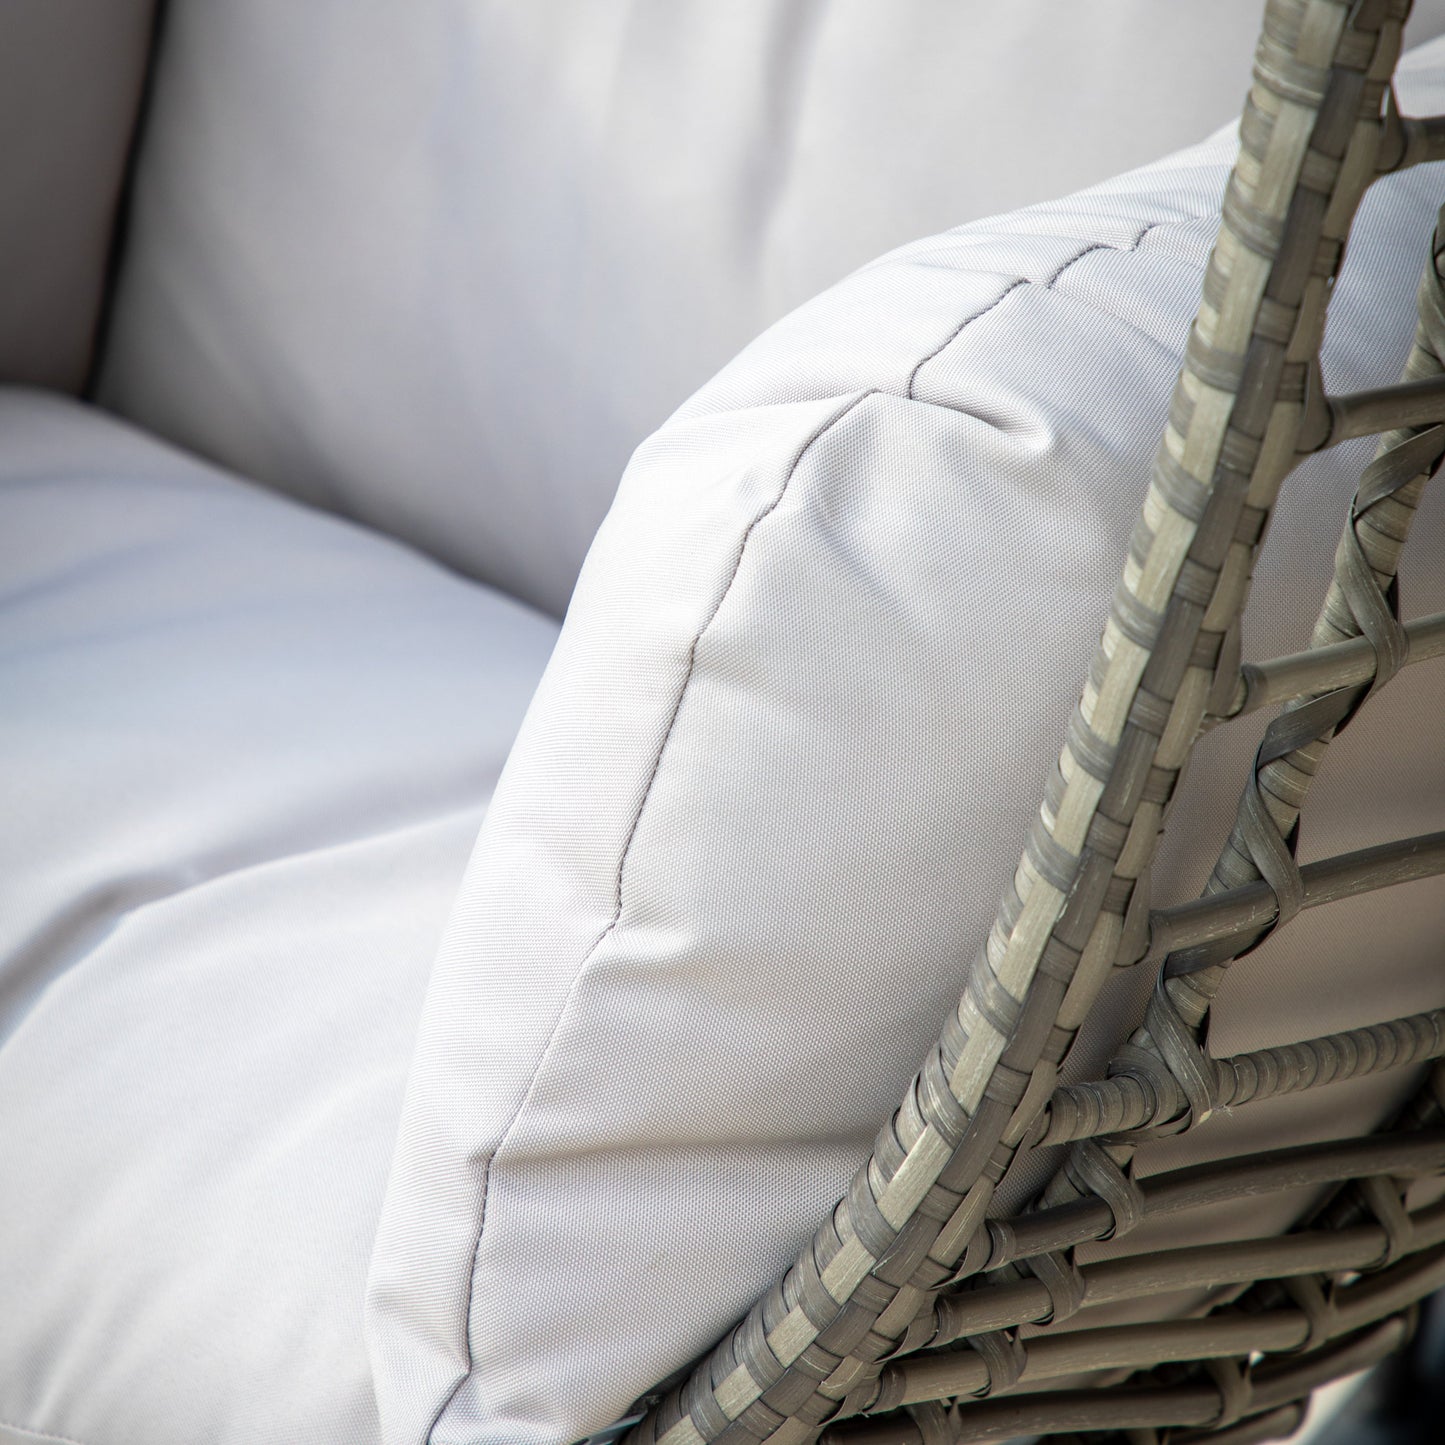 A close up of a white cushion on a stylish Woodleigh Hanging Chair for interior decor.